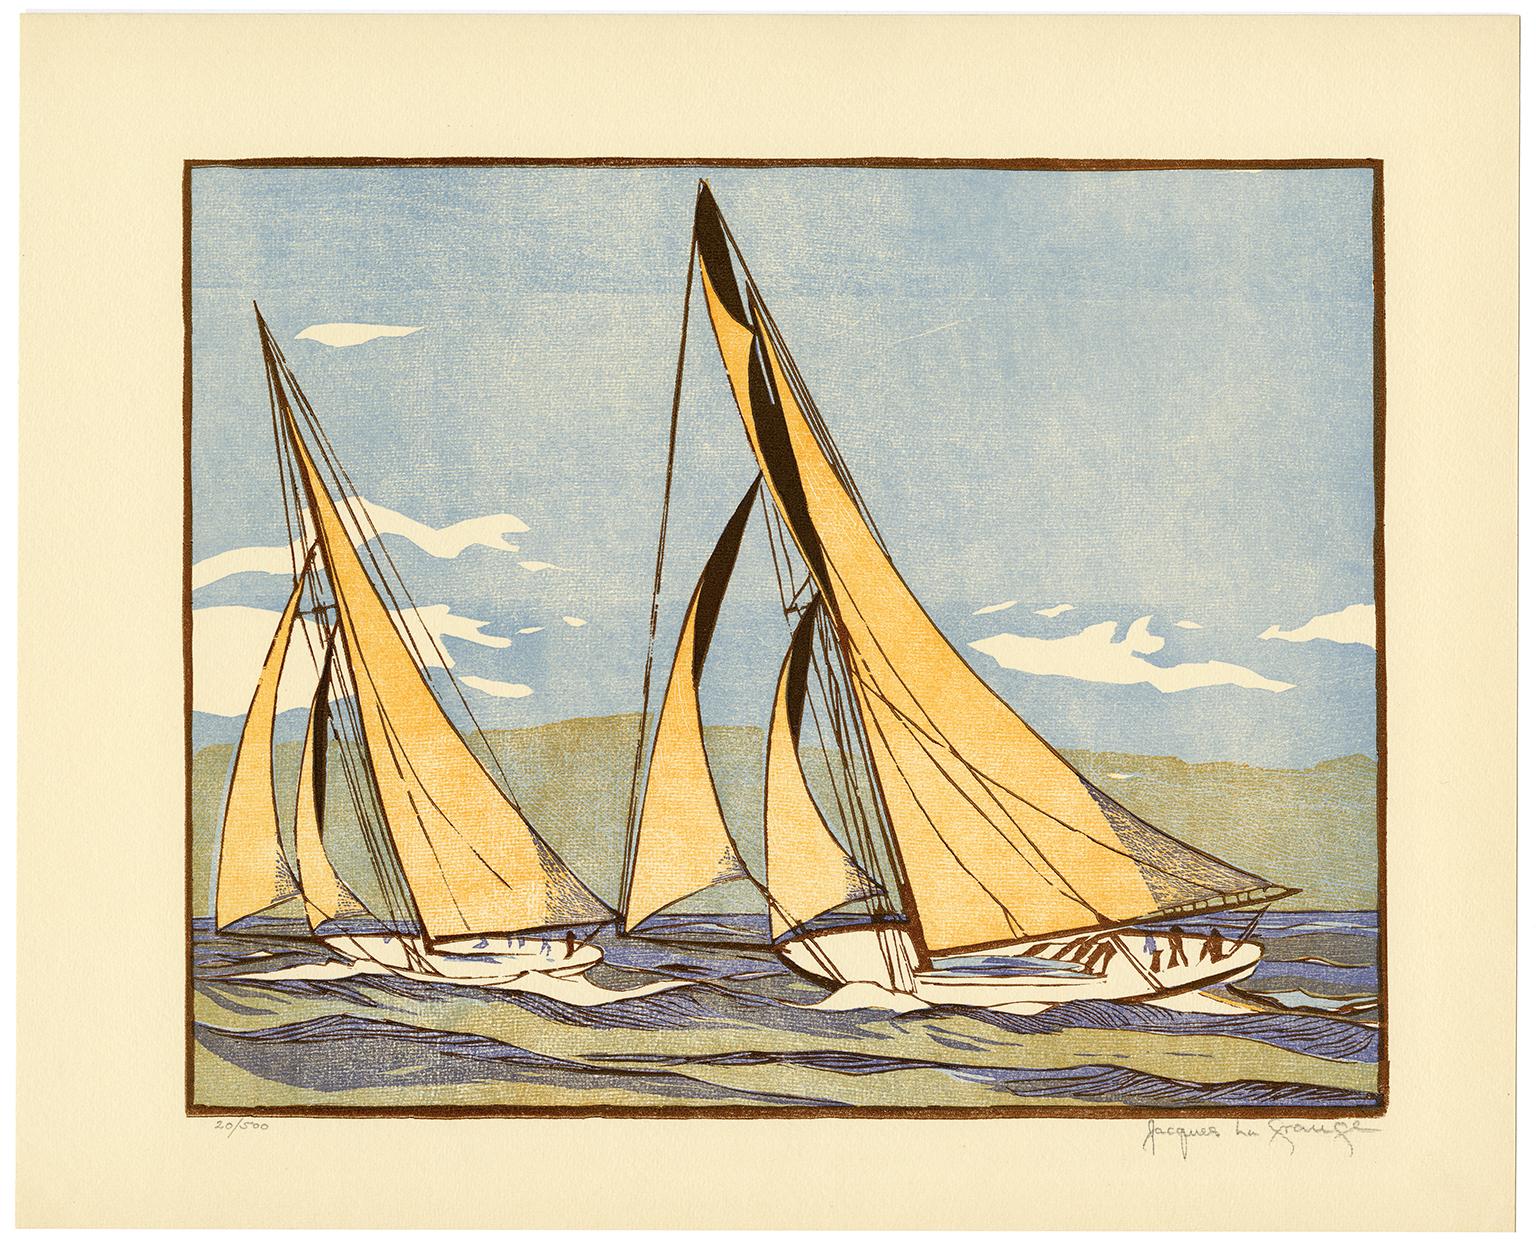 'The Start of the Race' — America's Cup, 1899 - Print by Jacques La Grange